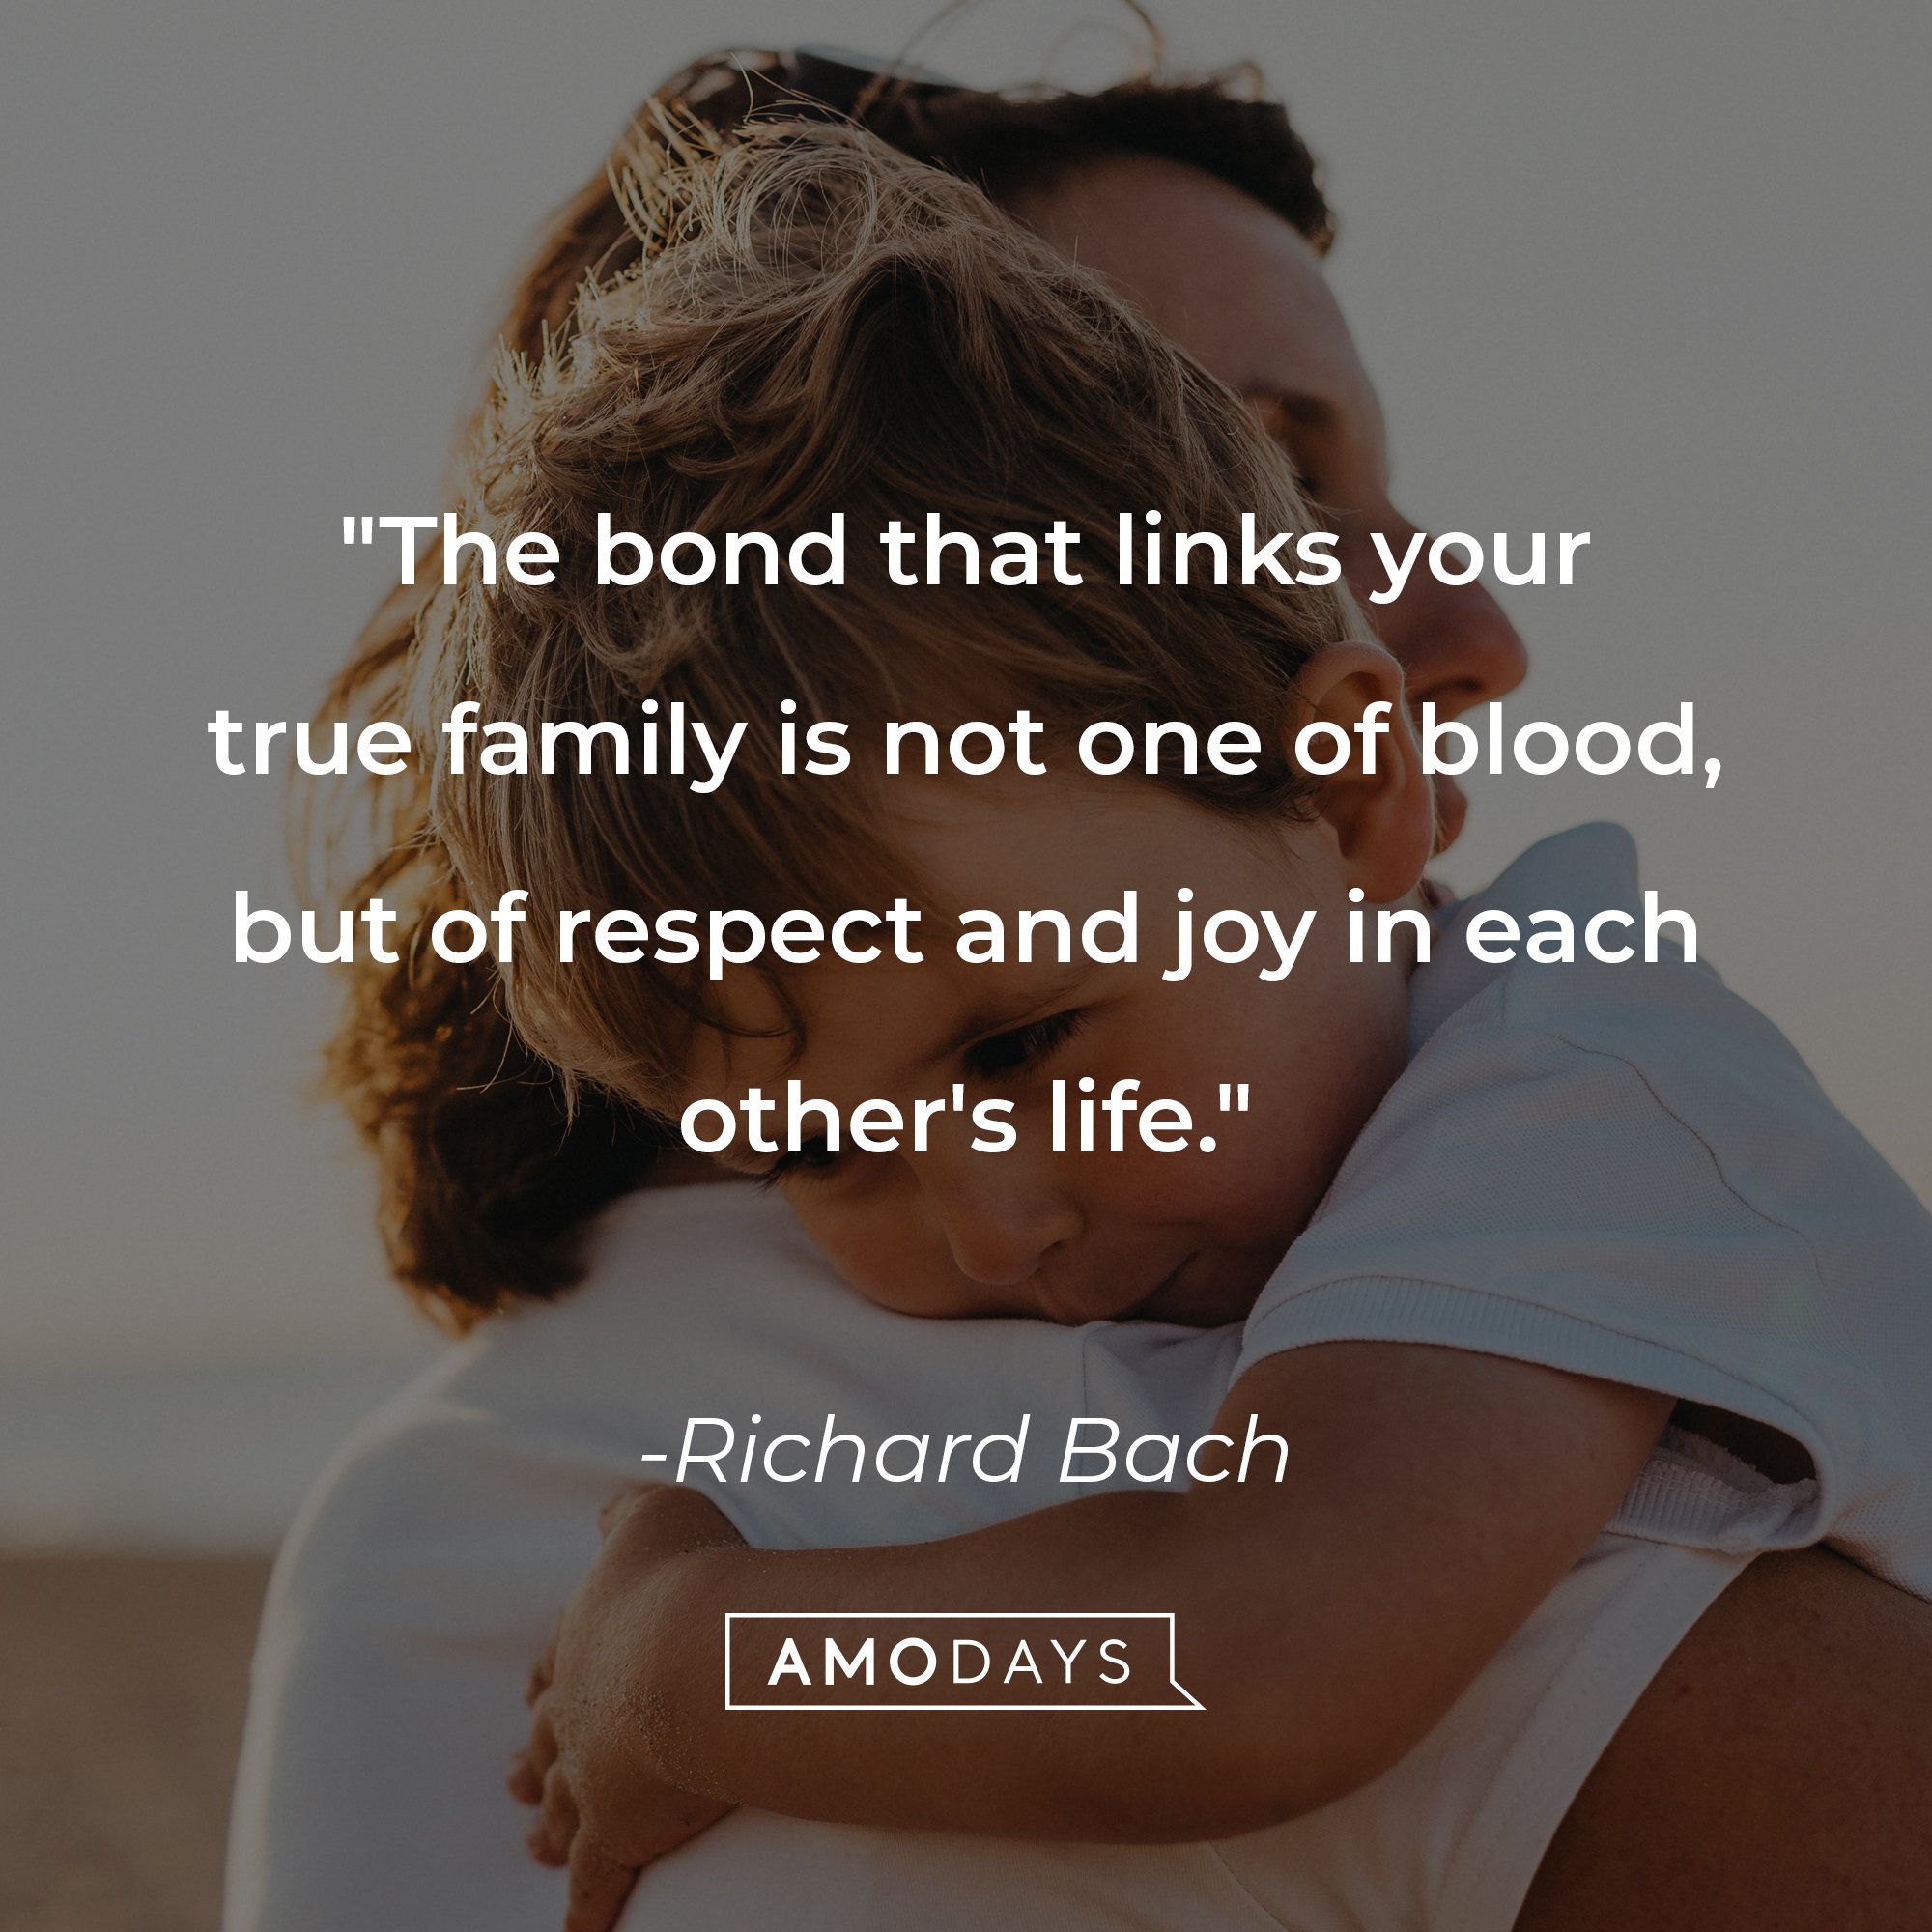 Richard Bach's quote: "The bond that links your true family is not one of blood, but of respect and joy in each other's life." | Image: AmoDays